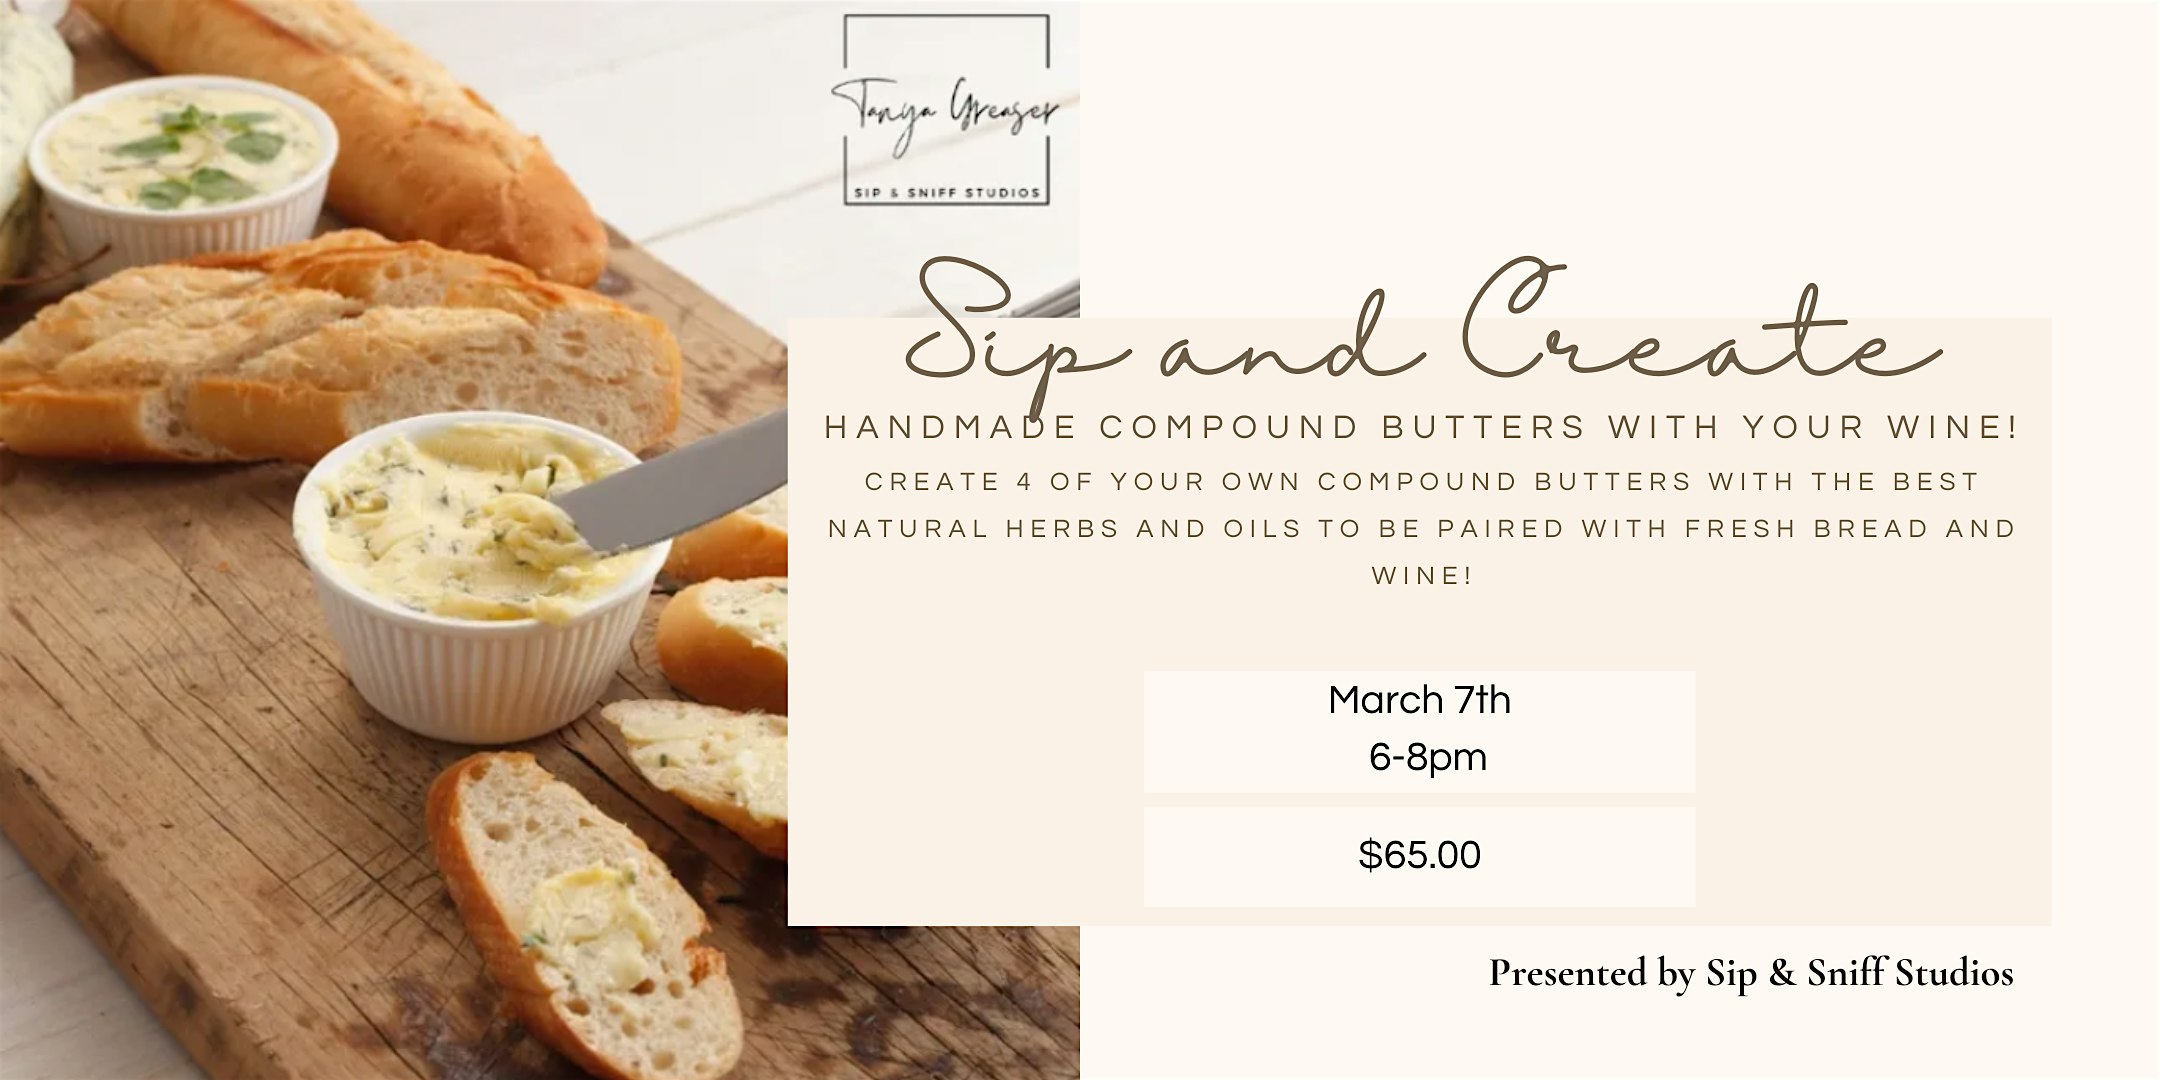 Sip & Create Handmade Compound Butters